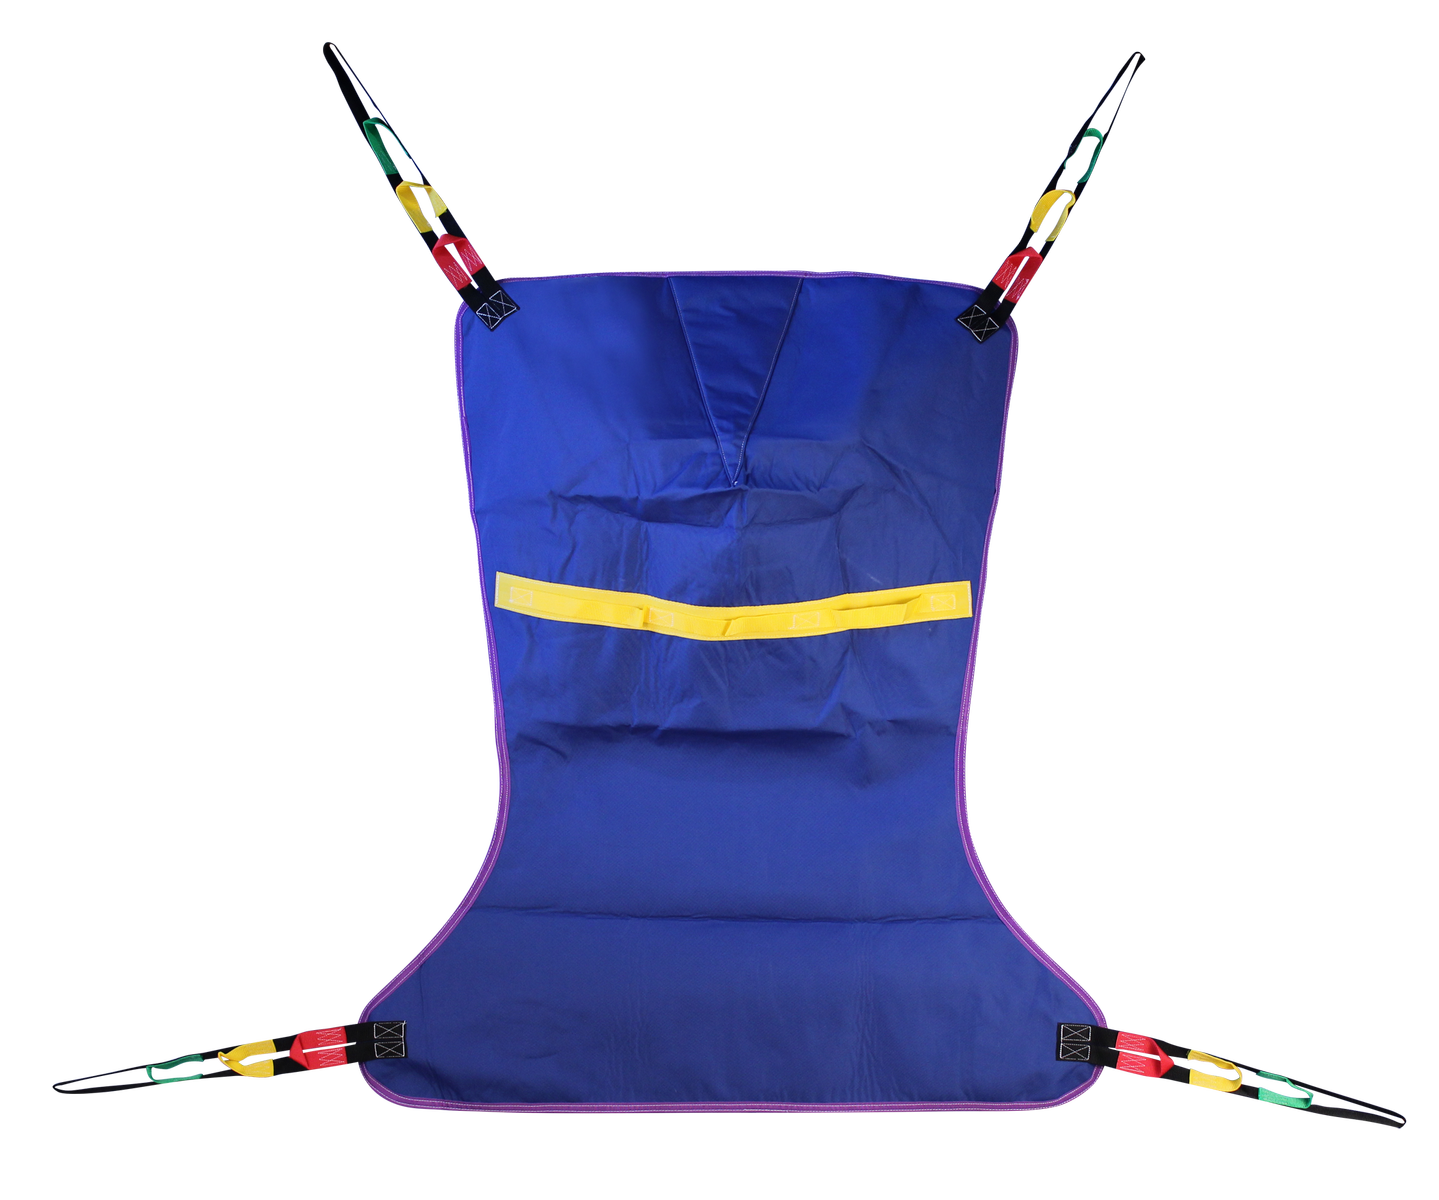 New Patient Lift Sling/hoyer Lift Sling (multiple Styles/sizes Available)